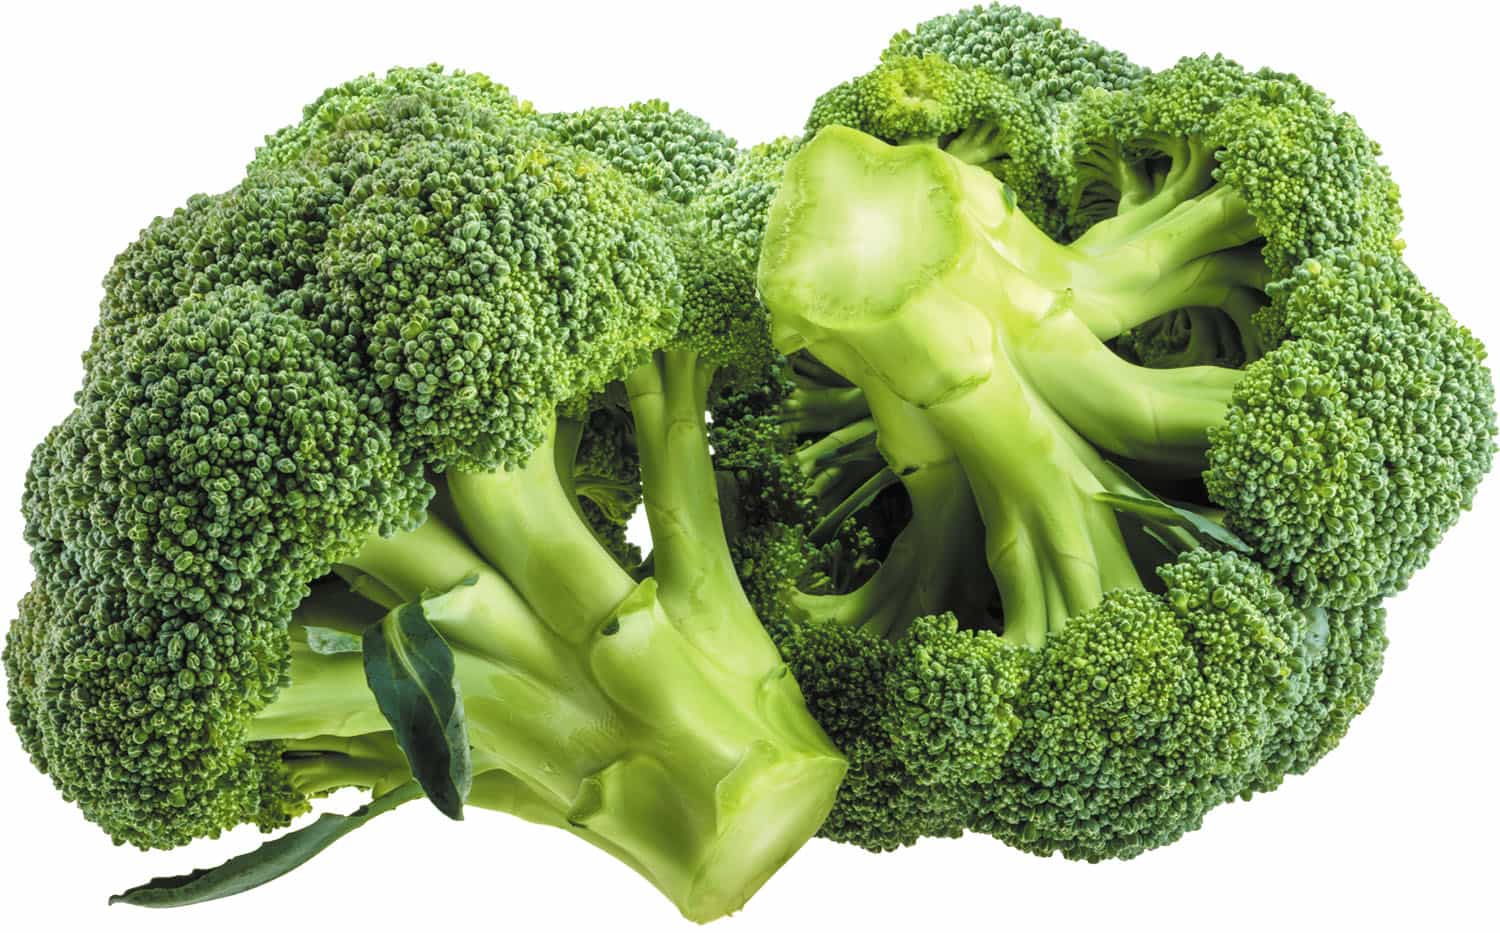 Unique and proven properties of broccoli